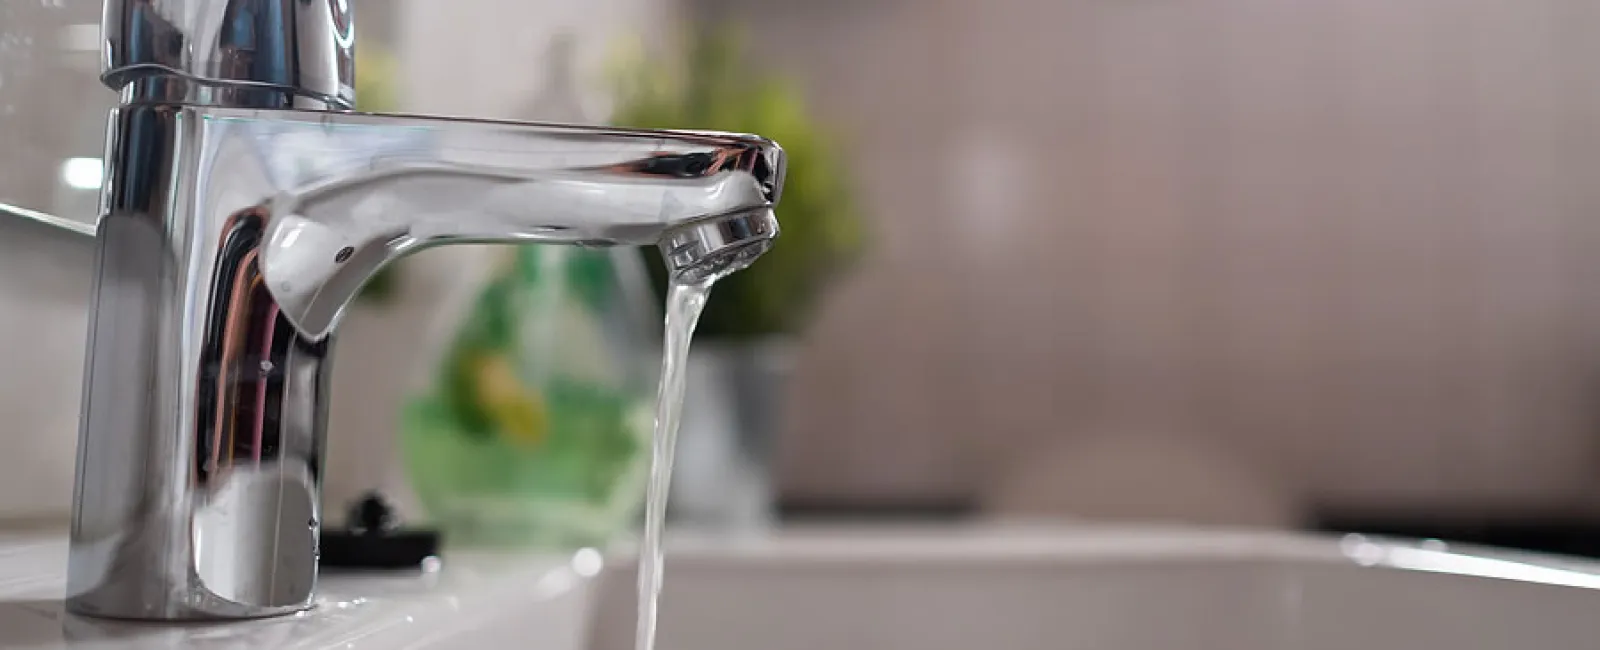 How Safe Is Your Home's Water?